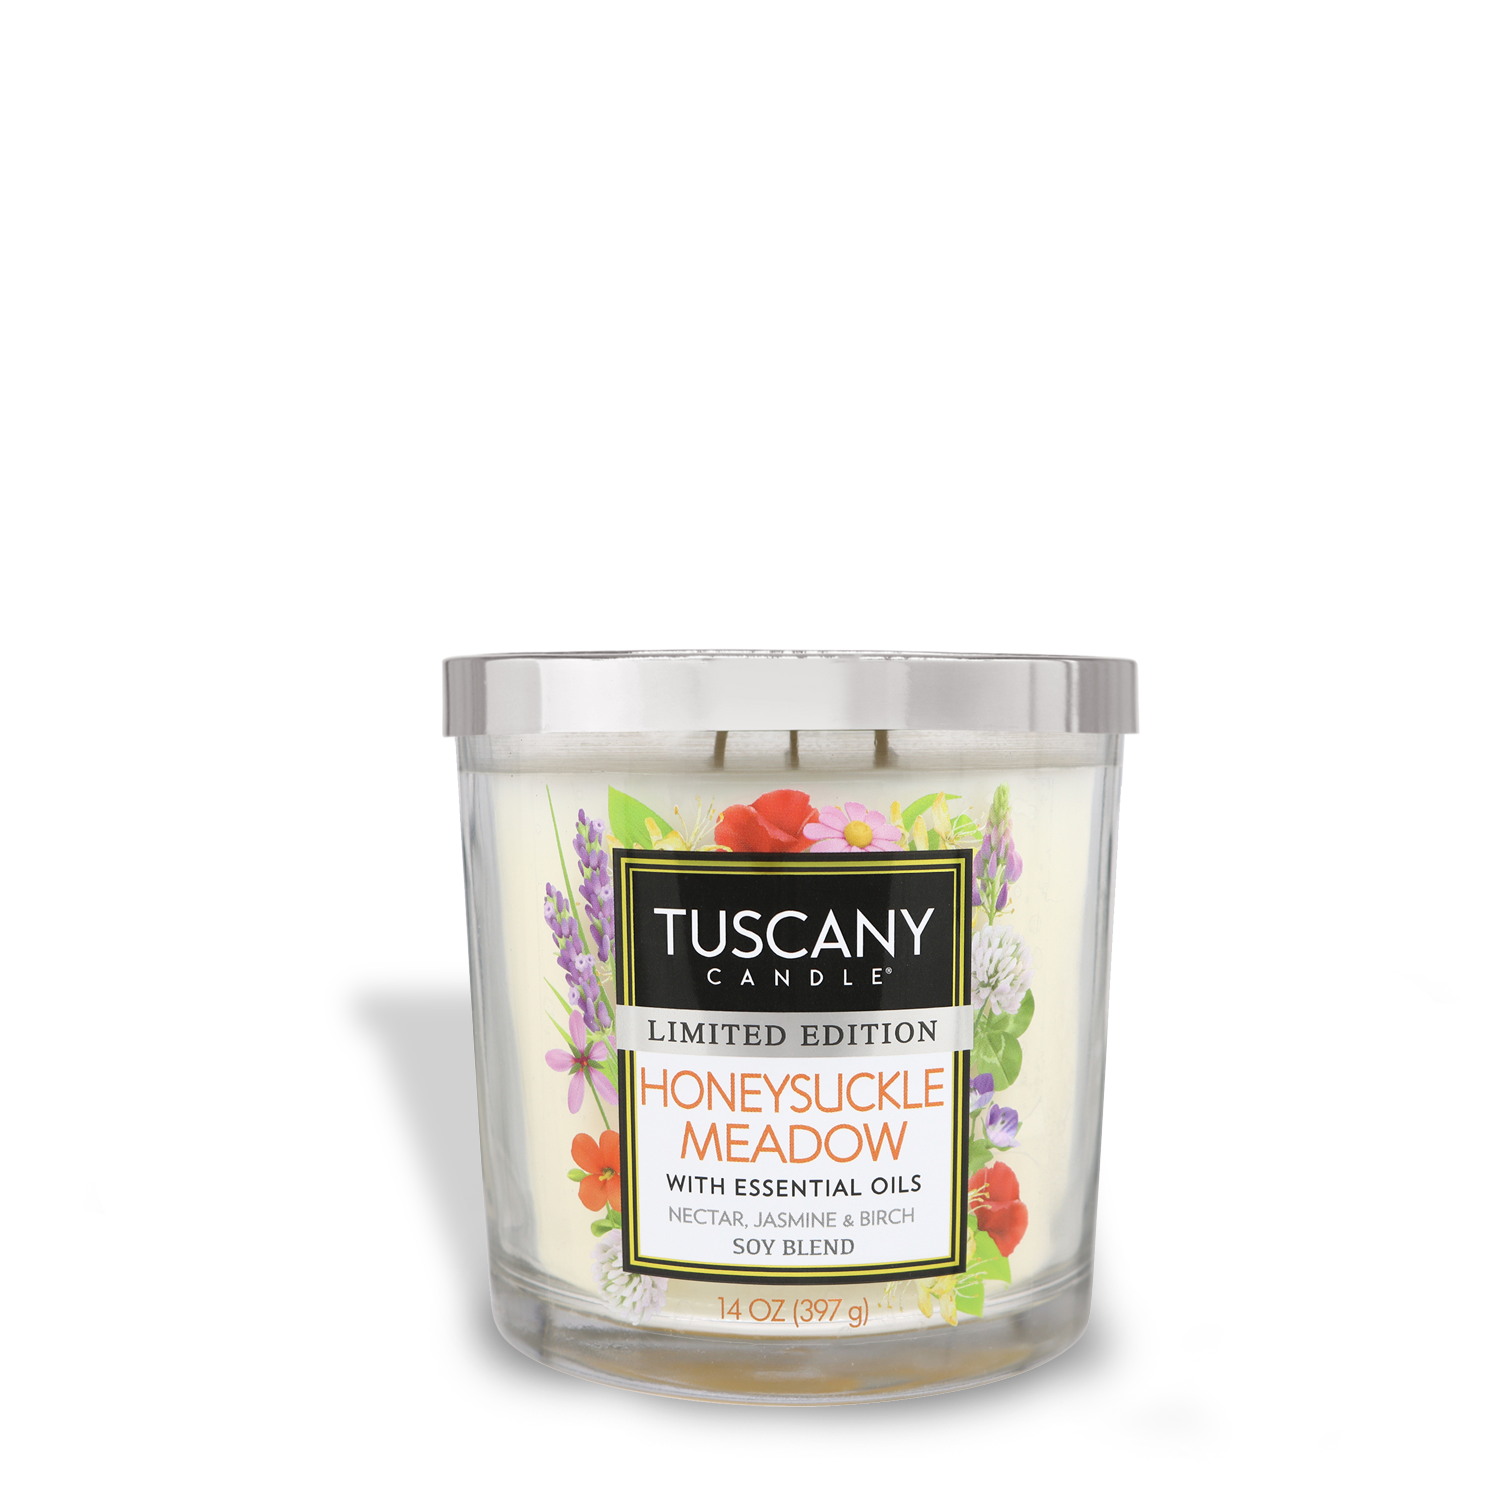 A Tuscany Candle® SEASONAL Honeysuckle Meadow Long-Lasting Scented Jar Candle (14 oz) with essential oils.